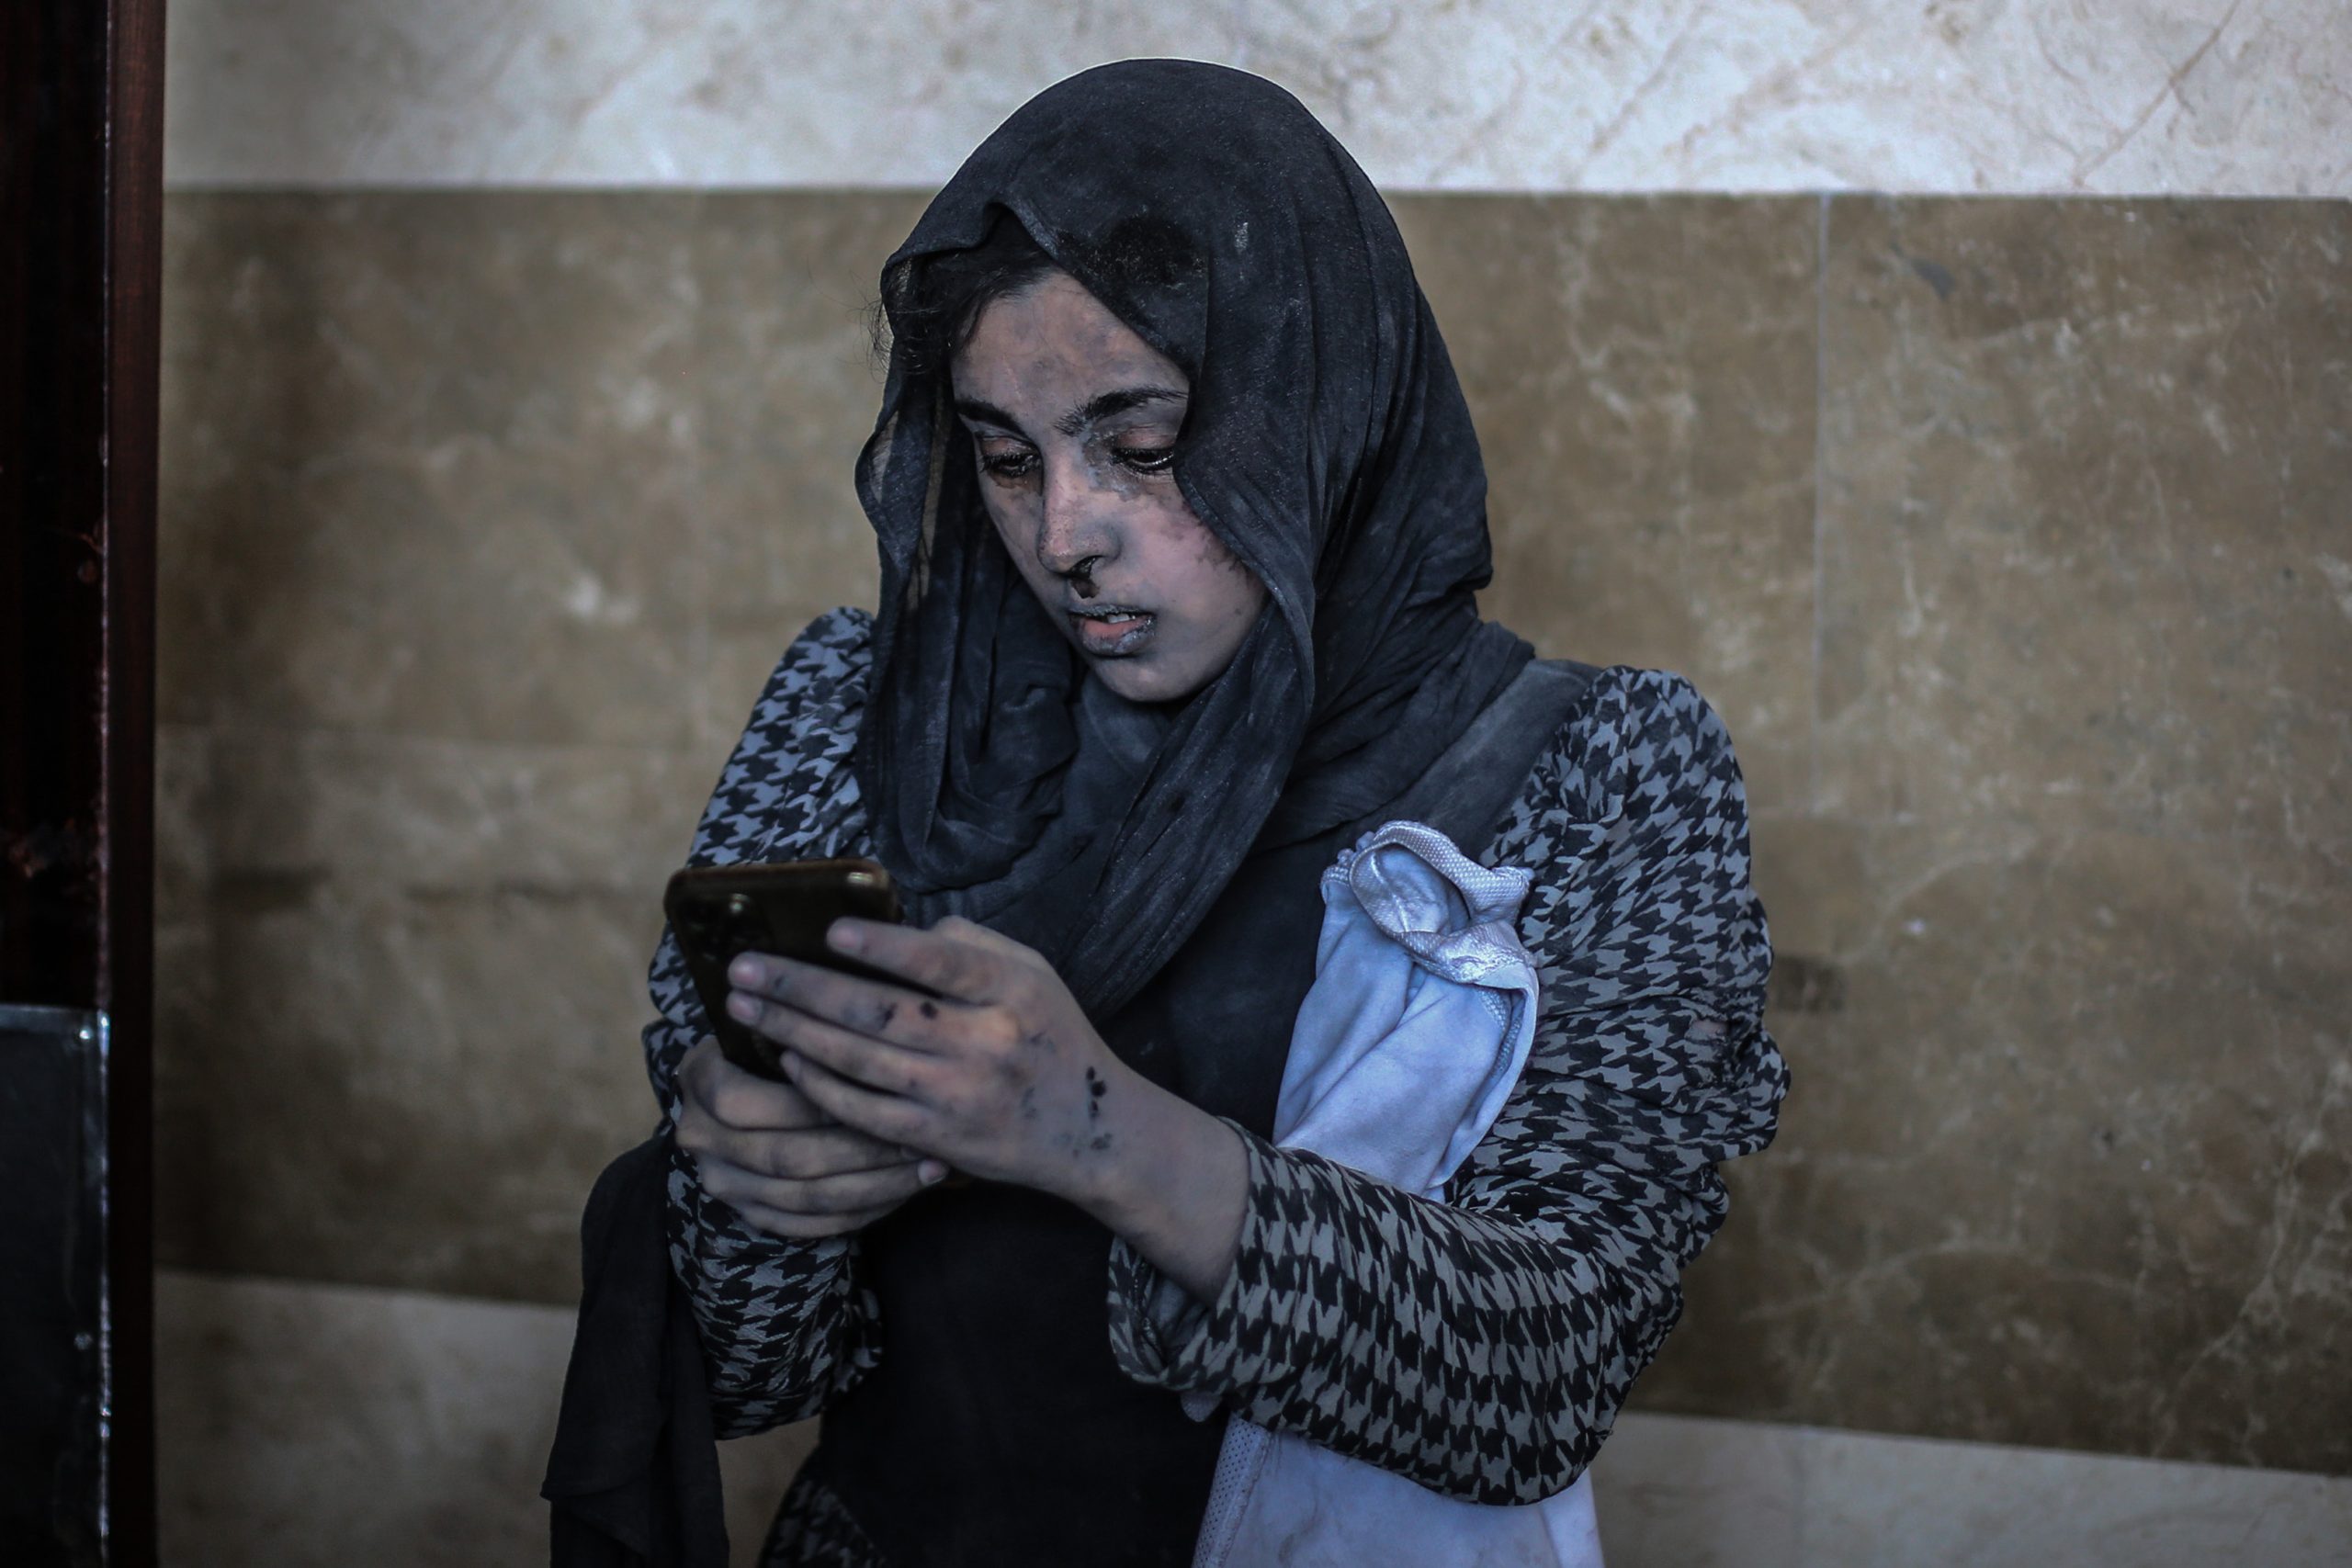 How information travels during Gaza’s communications blackouts